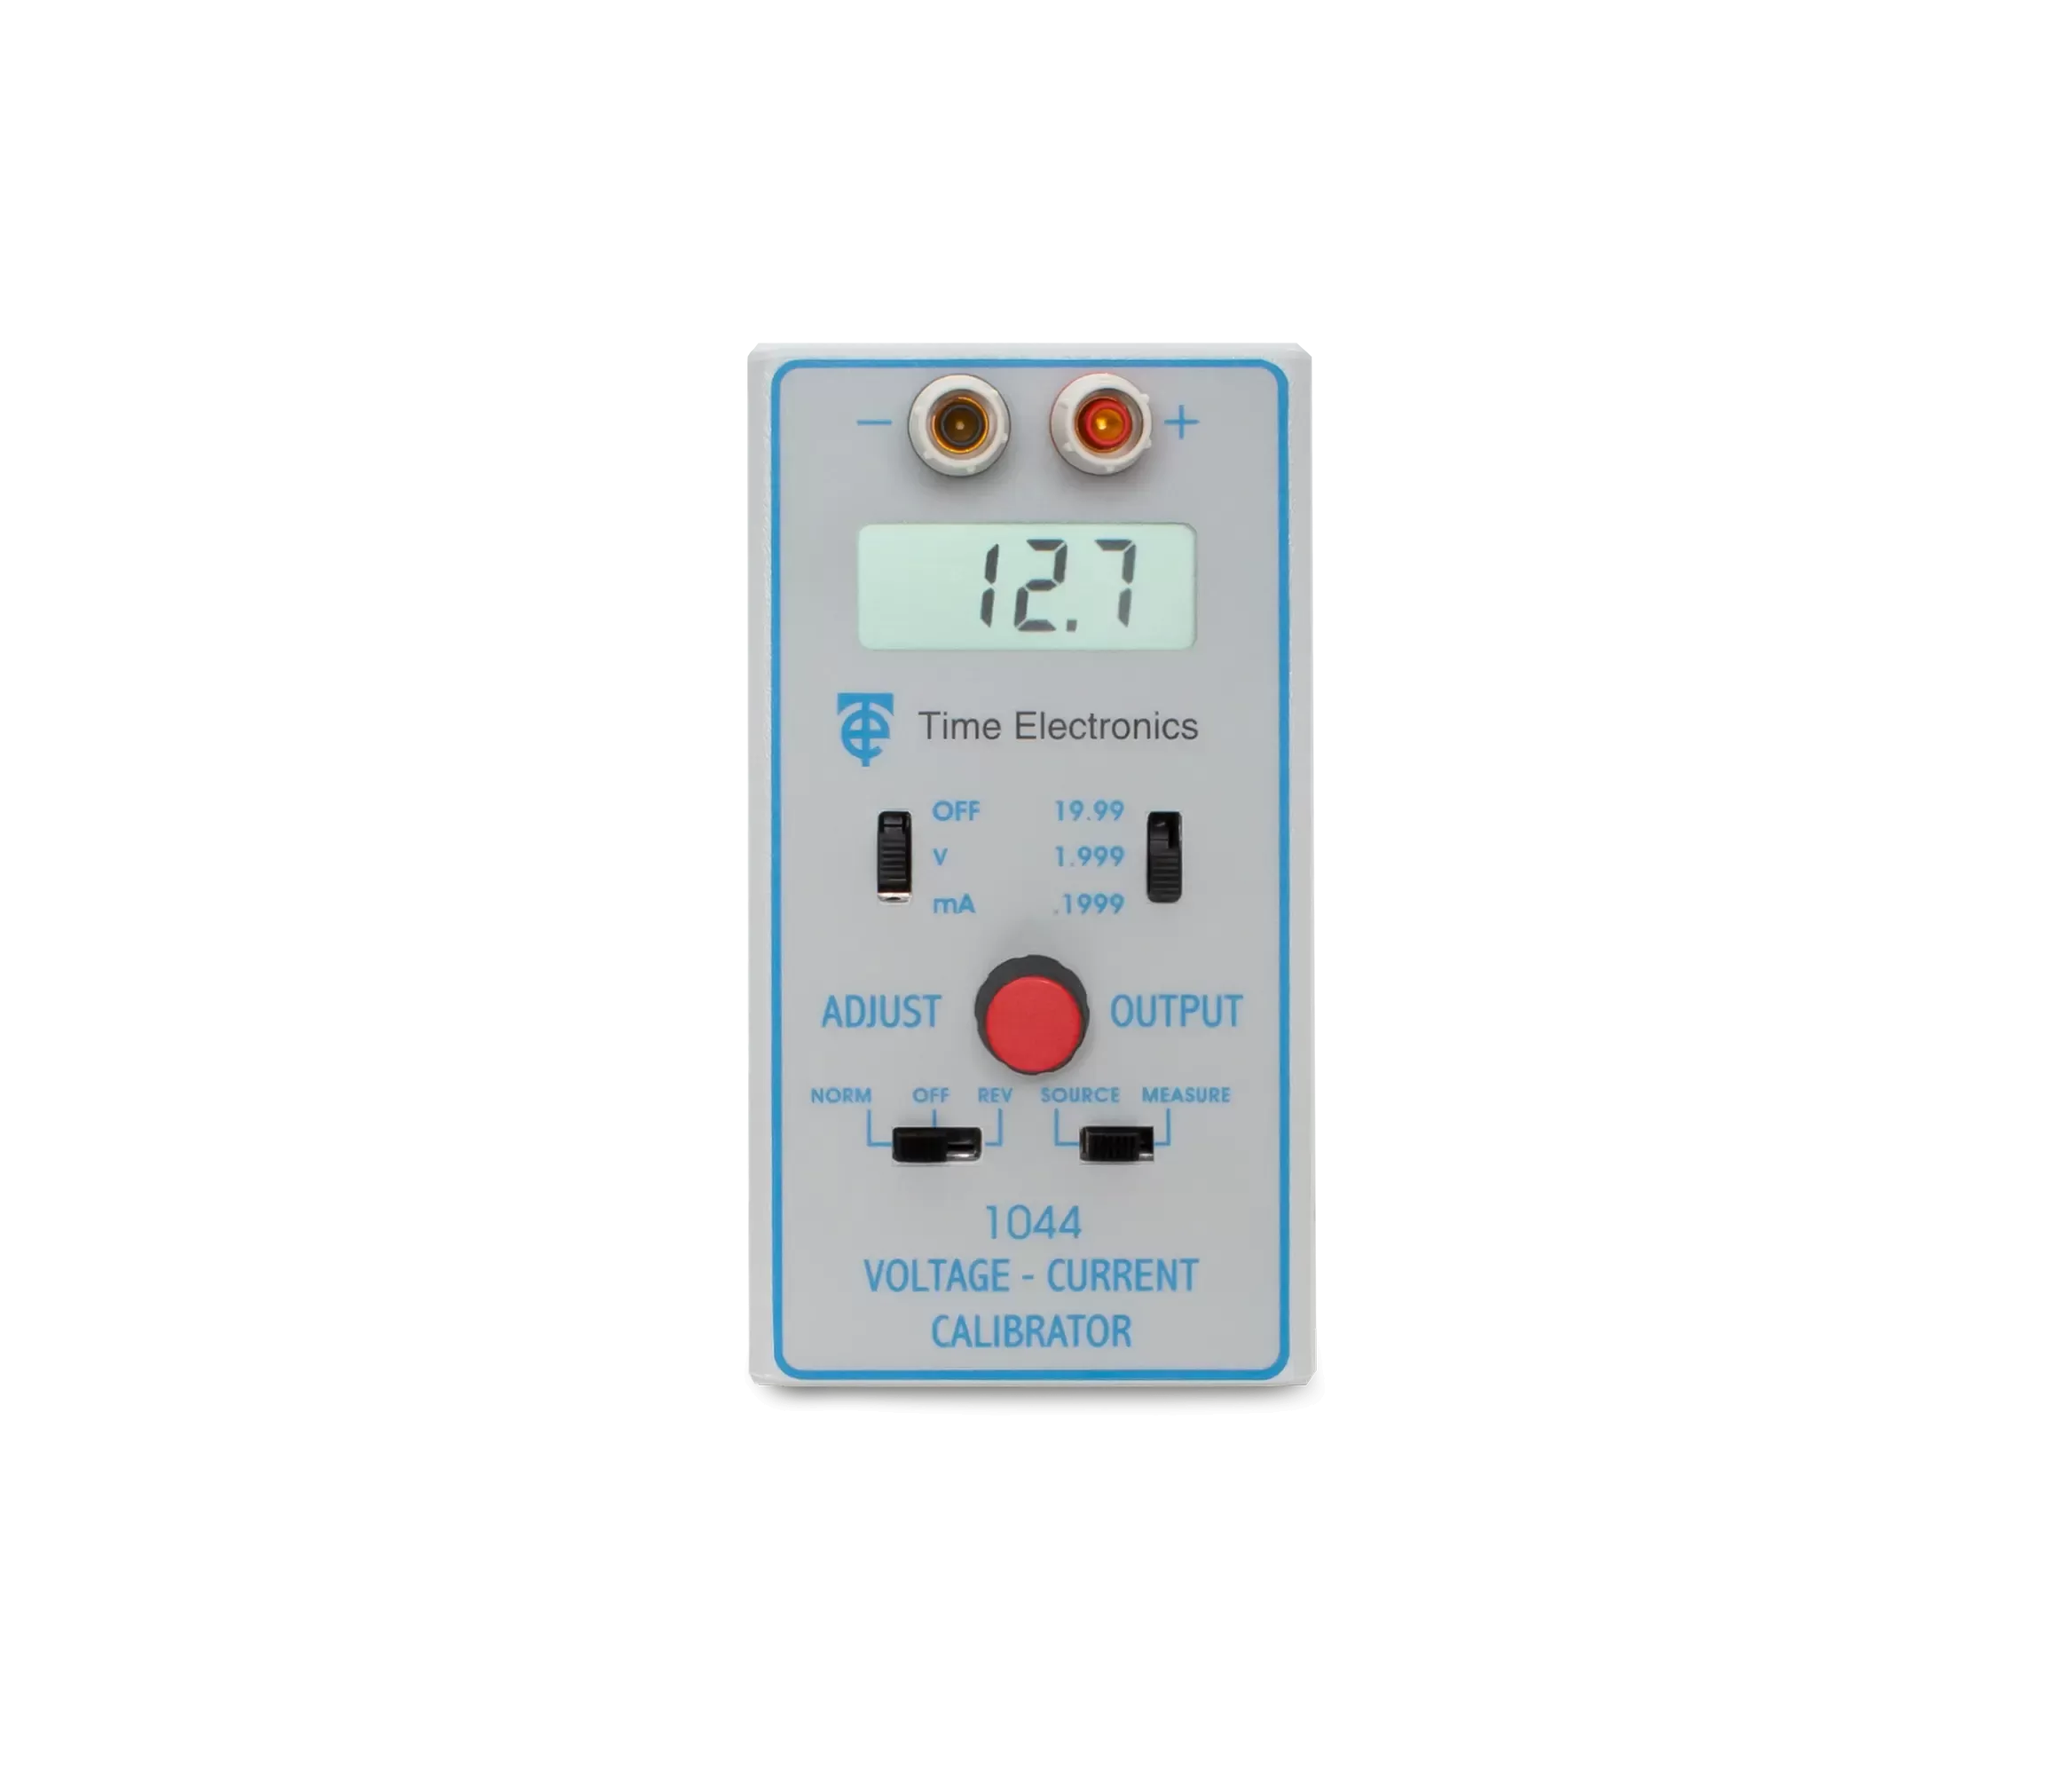 1044 Voltage And Current Calibrator